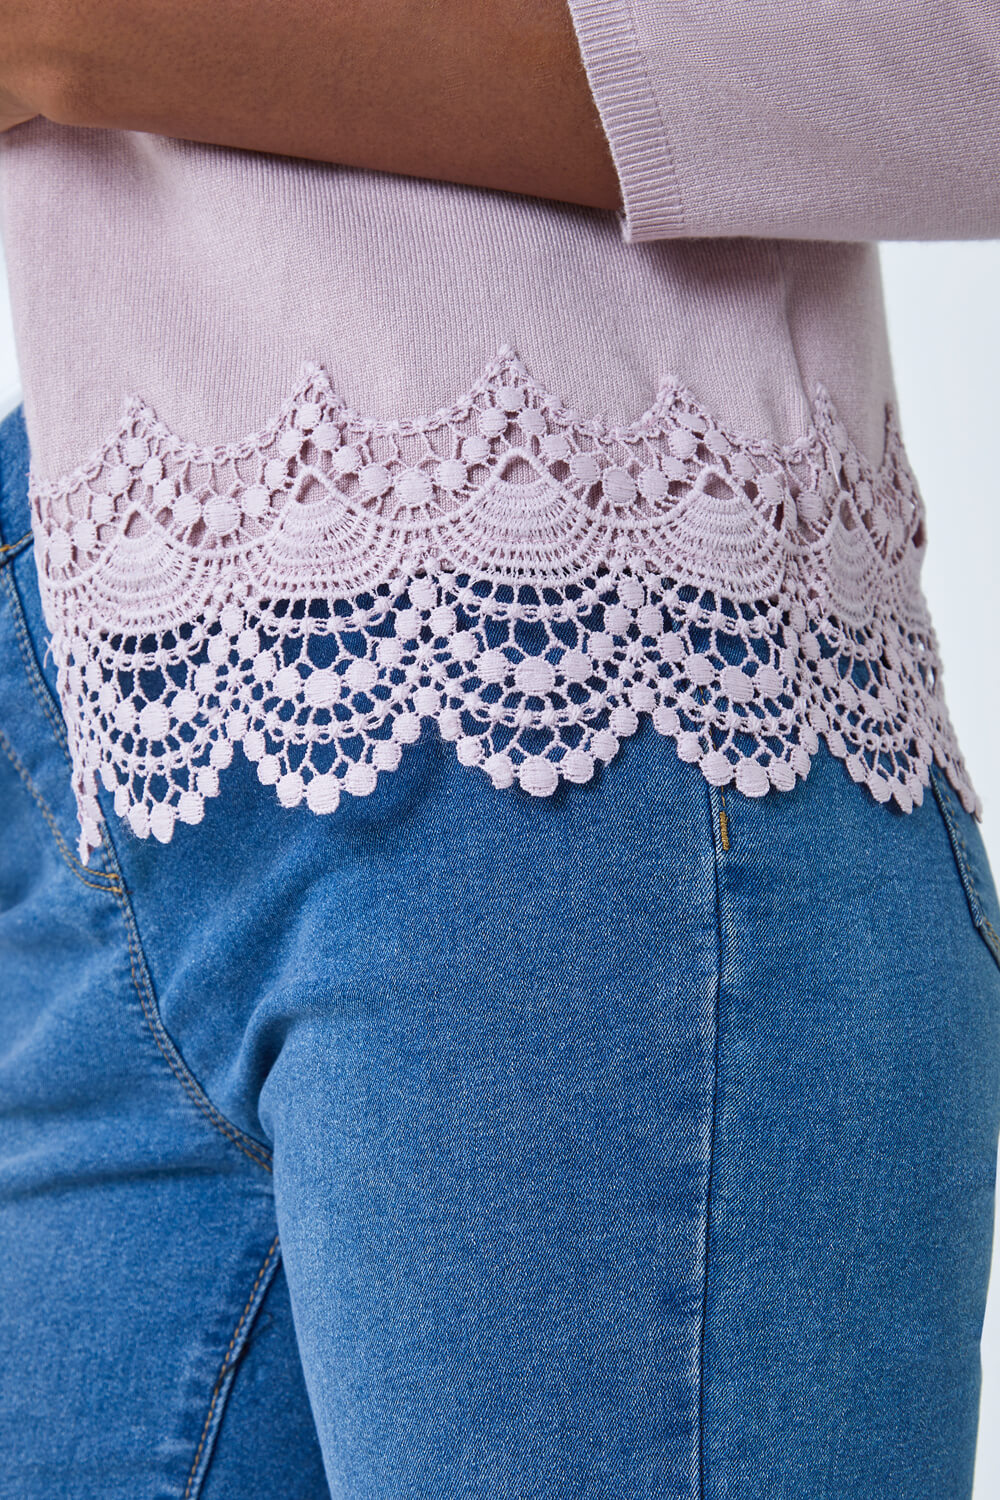 Rose Scalloped Lace Trim Knitted Shrug, Image 5 of 5